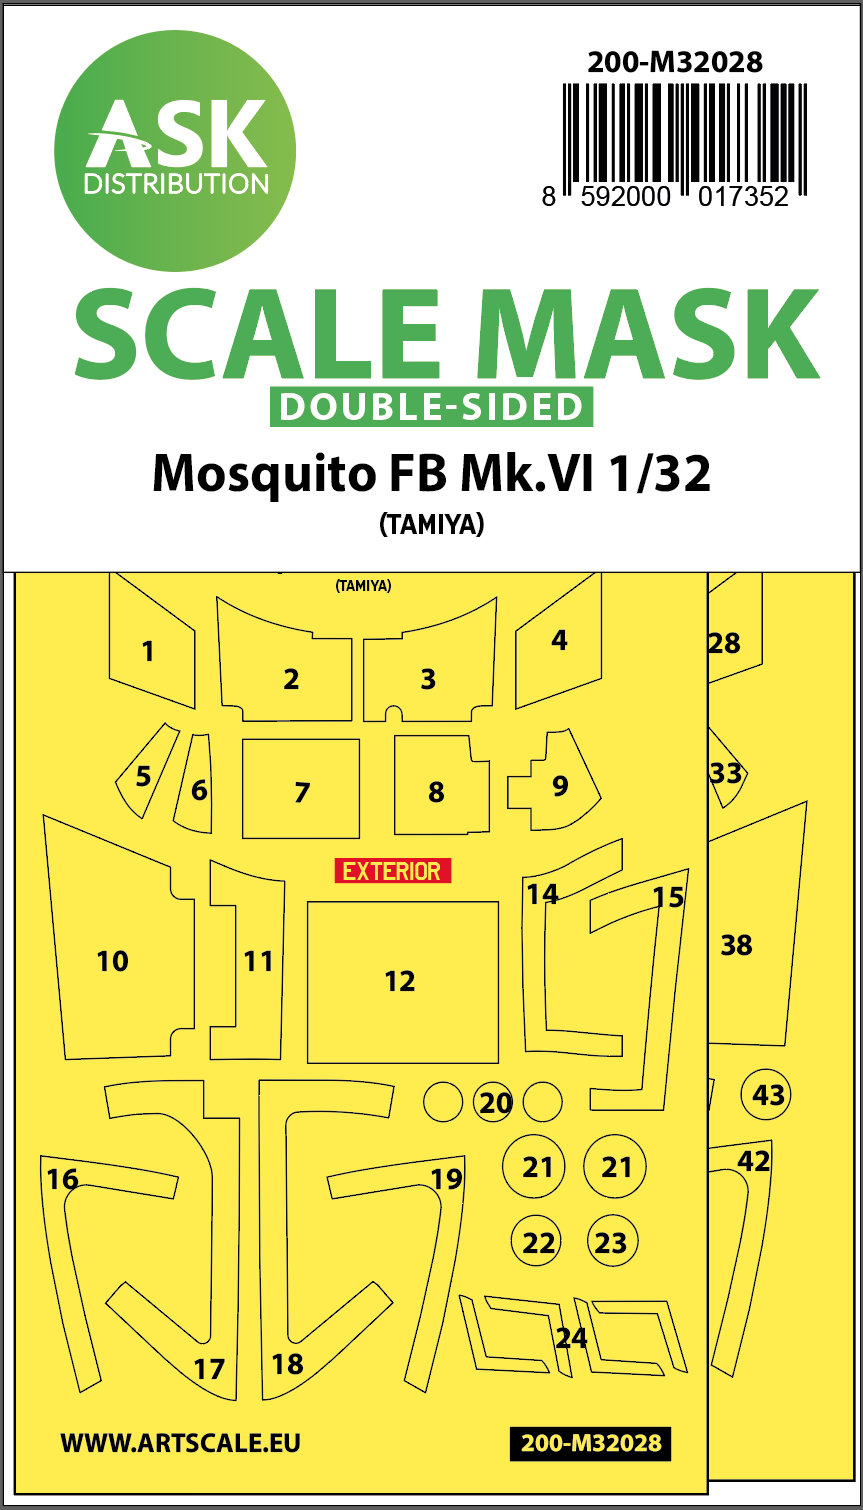 1/32 Mosquito FB Mk.VI double-sided express masks for Tamiya